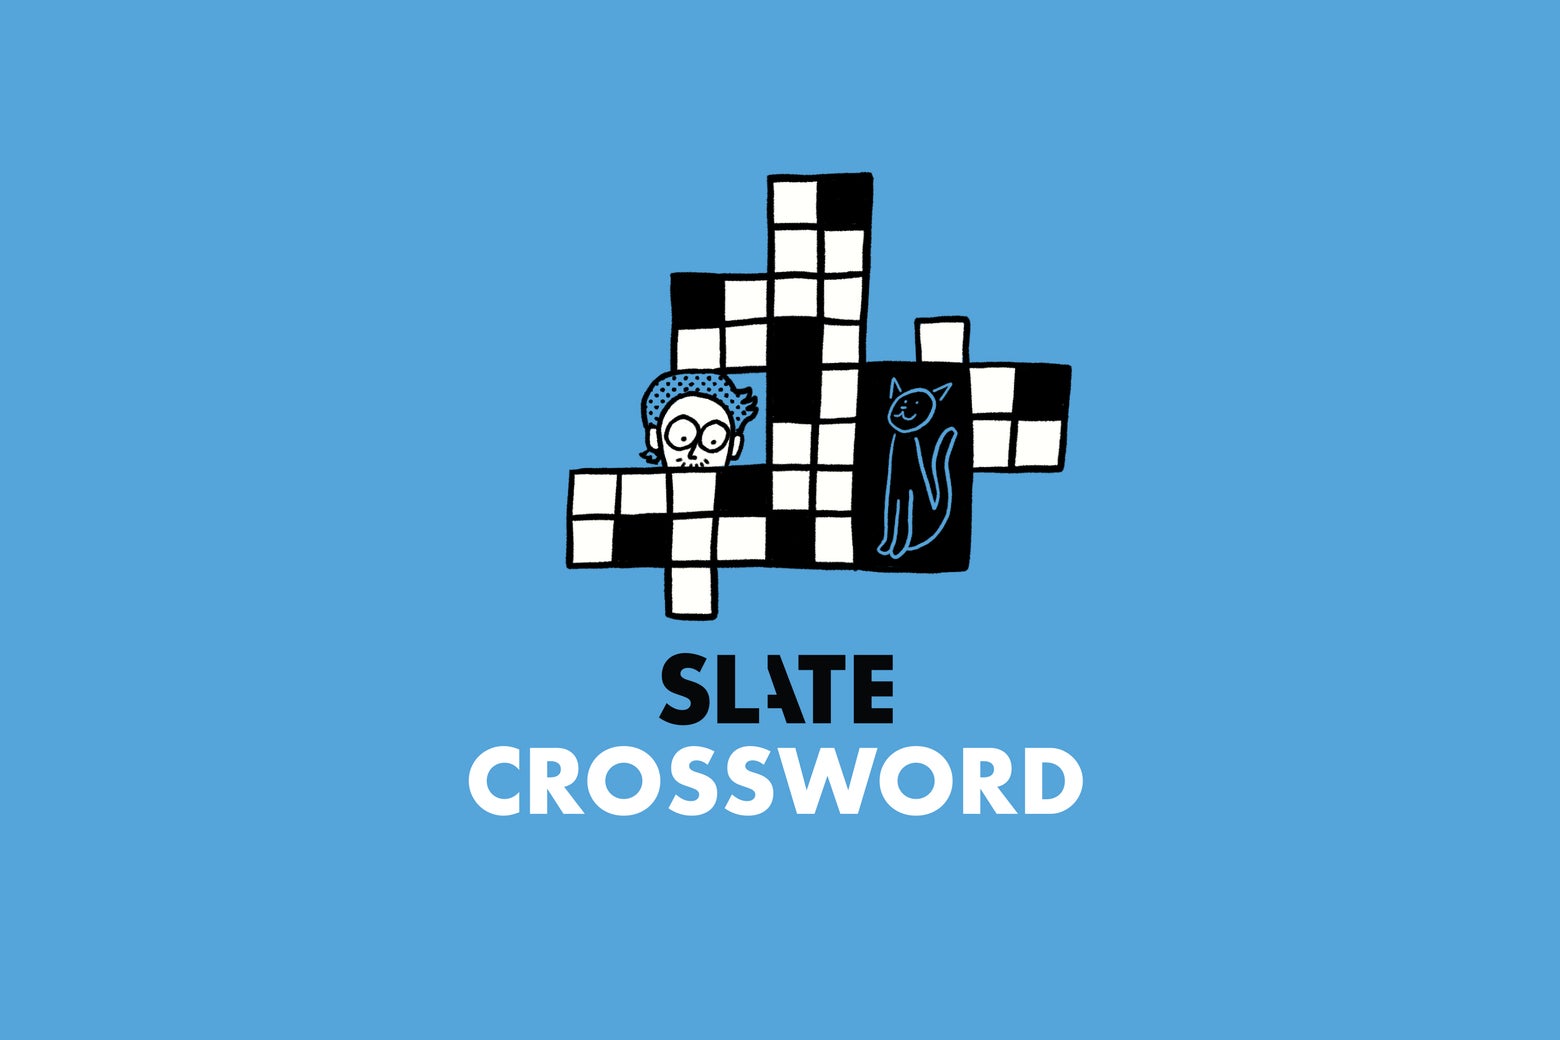 Slate Crossword: NBC Present Turning 50 in ‘25 (Three Letters)
        
        
          
            April 16, 2024
            5:50 AM